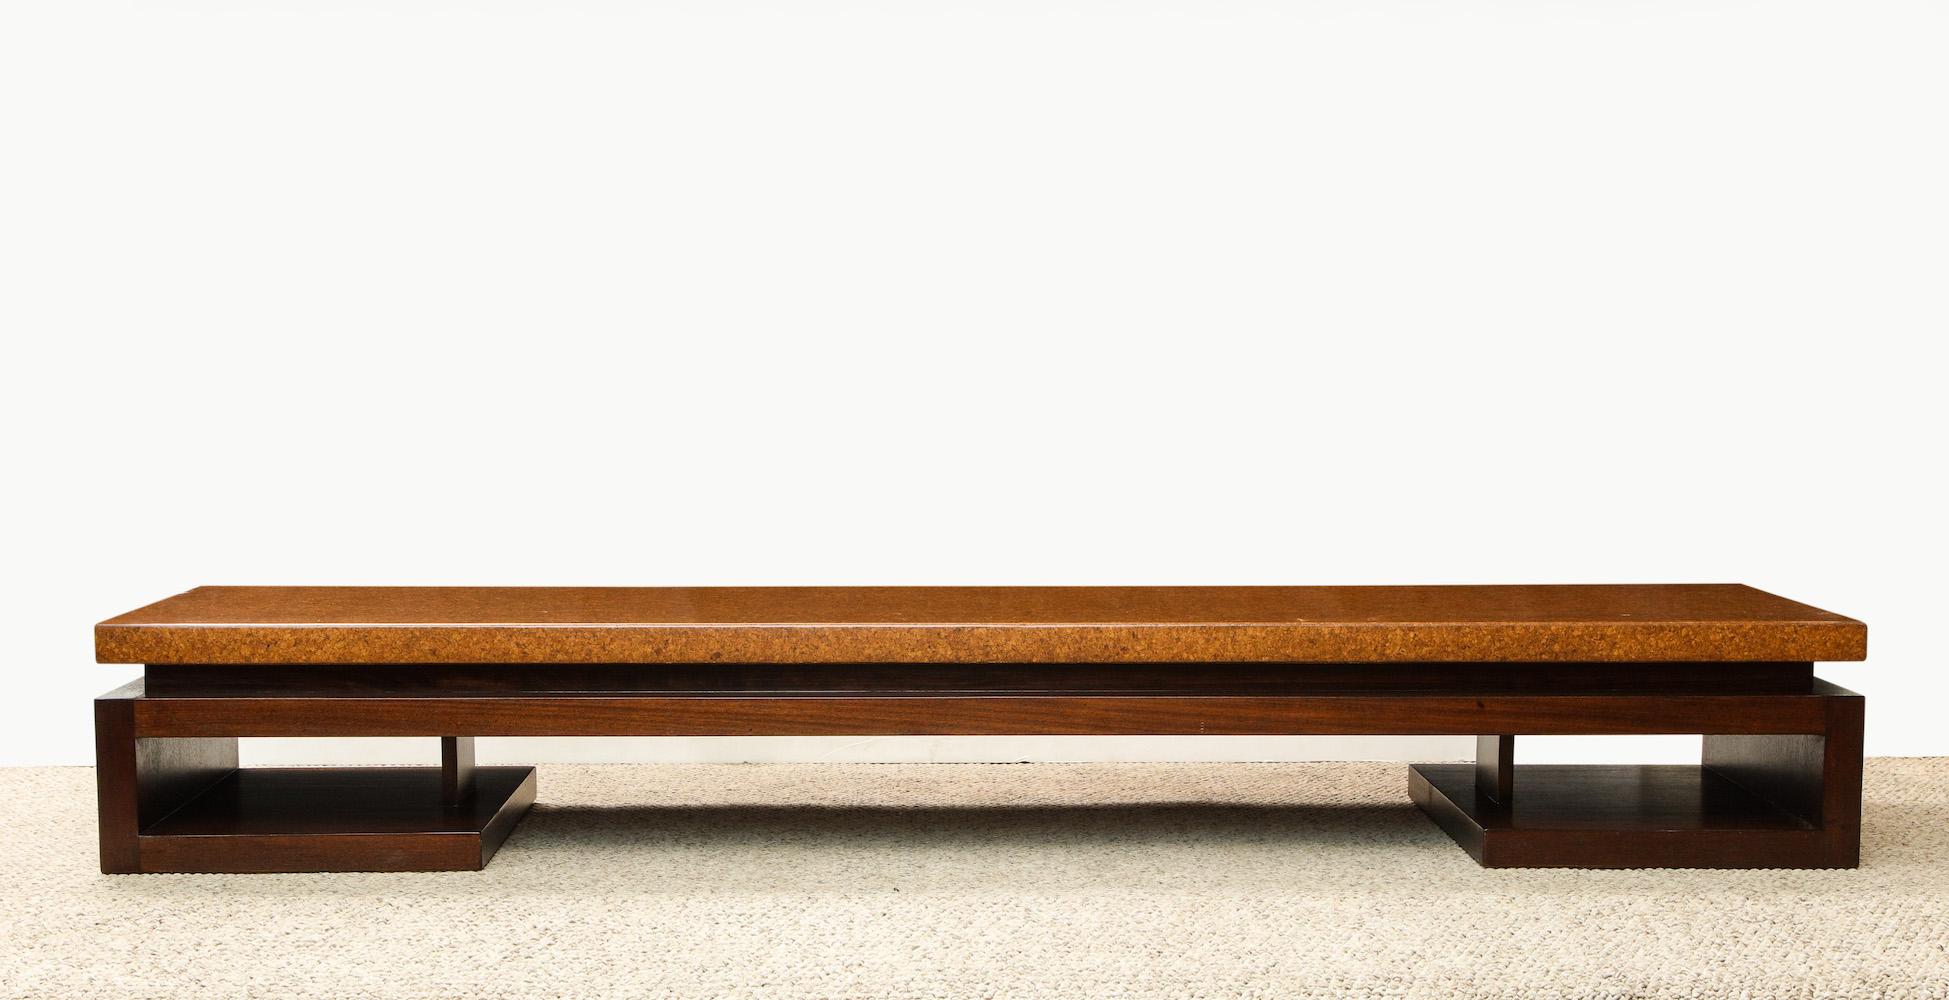 Asian-inspired form with cork-wrapped top above dark-stained mahogany base. This piece is designed by Paul Frankl for Johnson furniture company from the post war period.